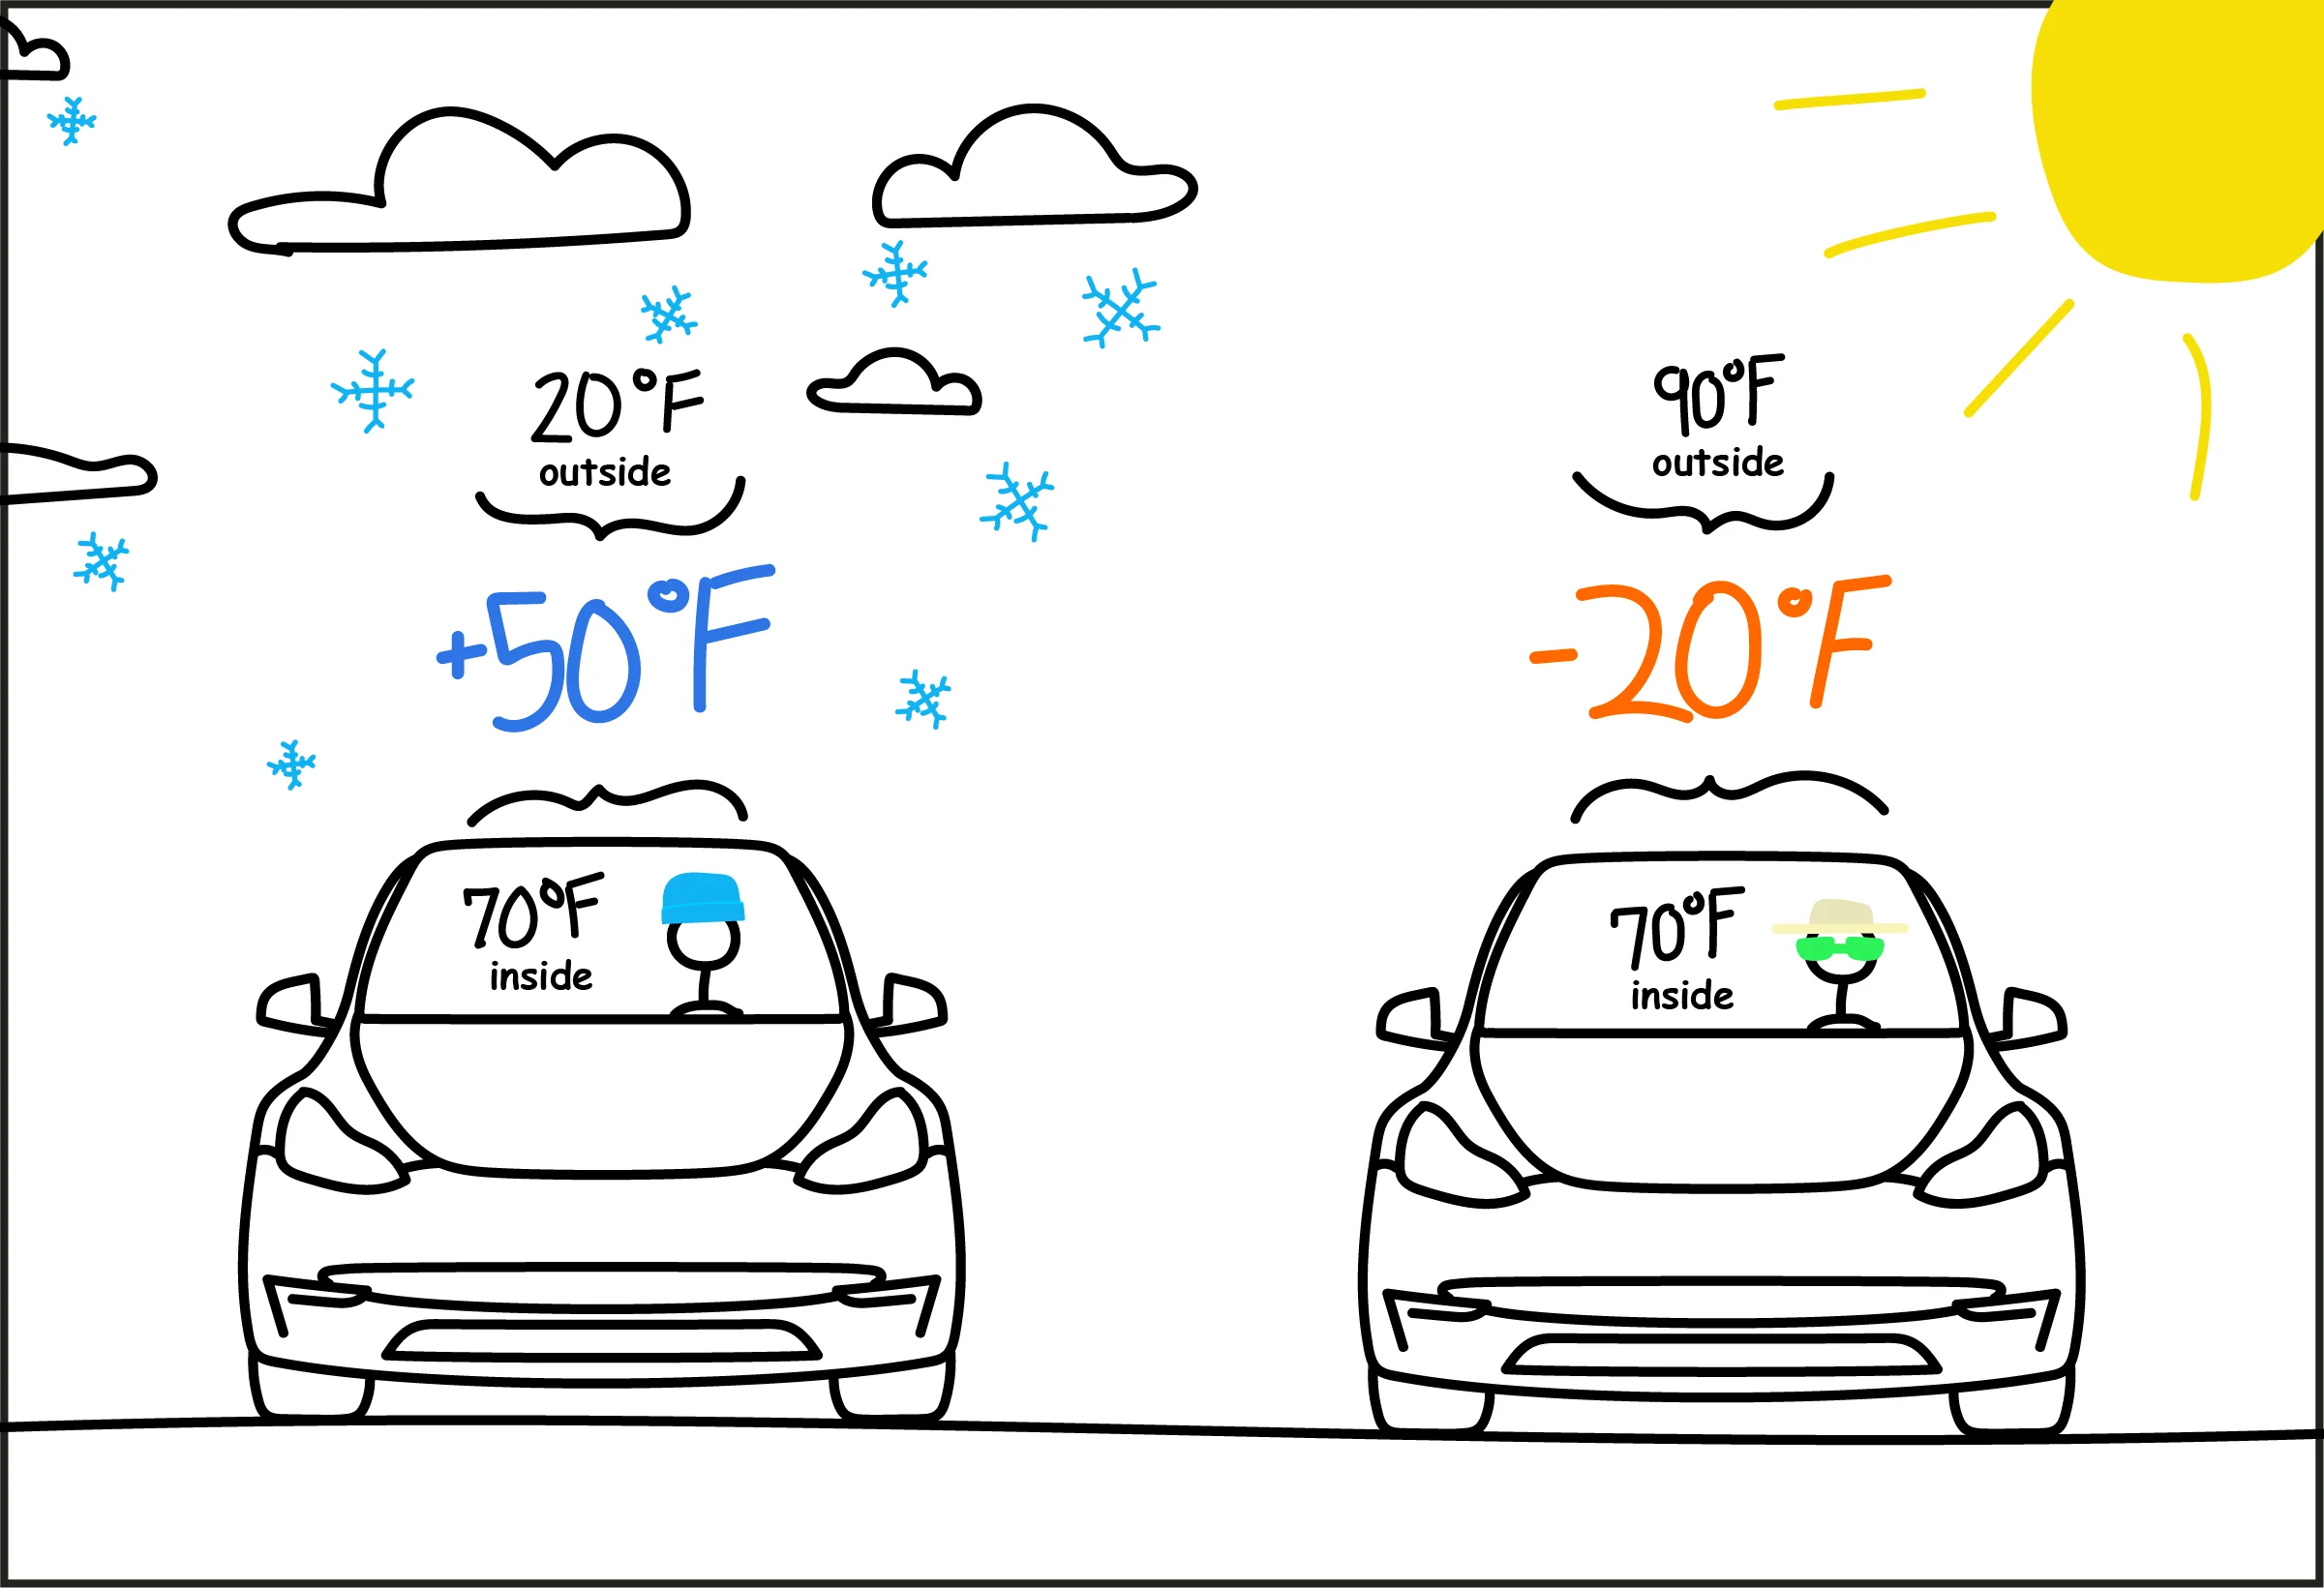 Illustration showing difference between inside and outside temperature in winter and summer